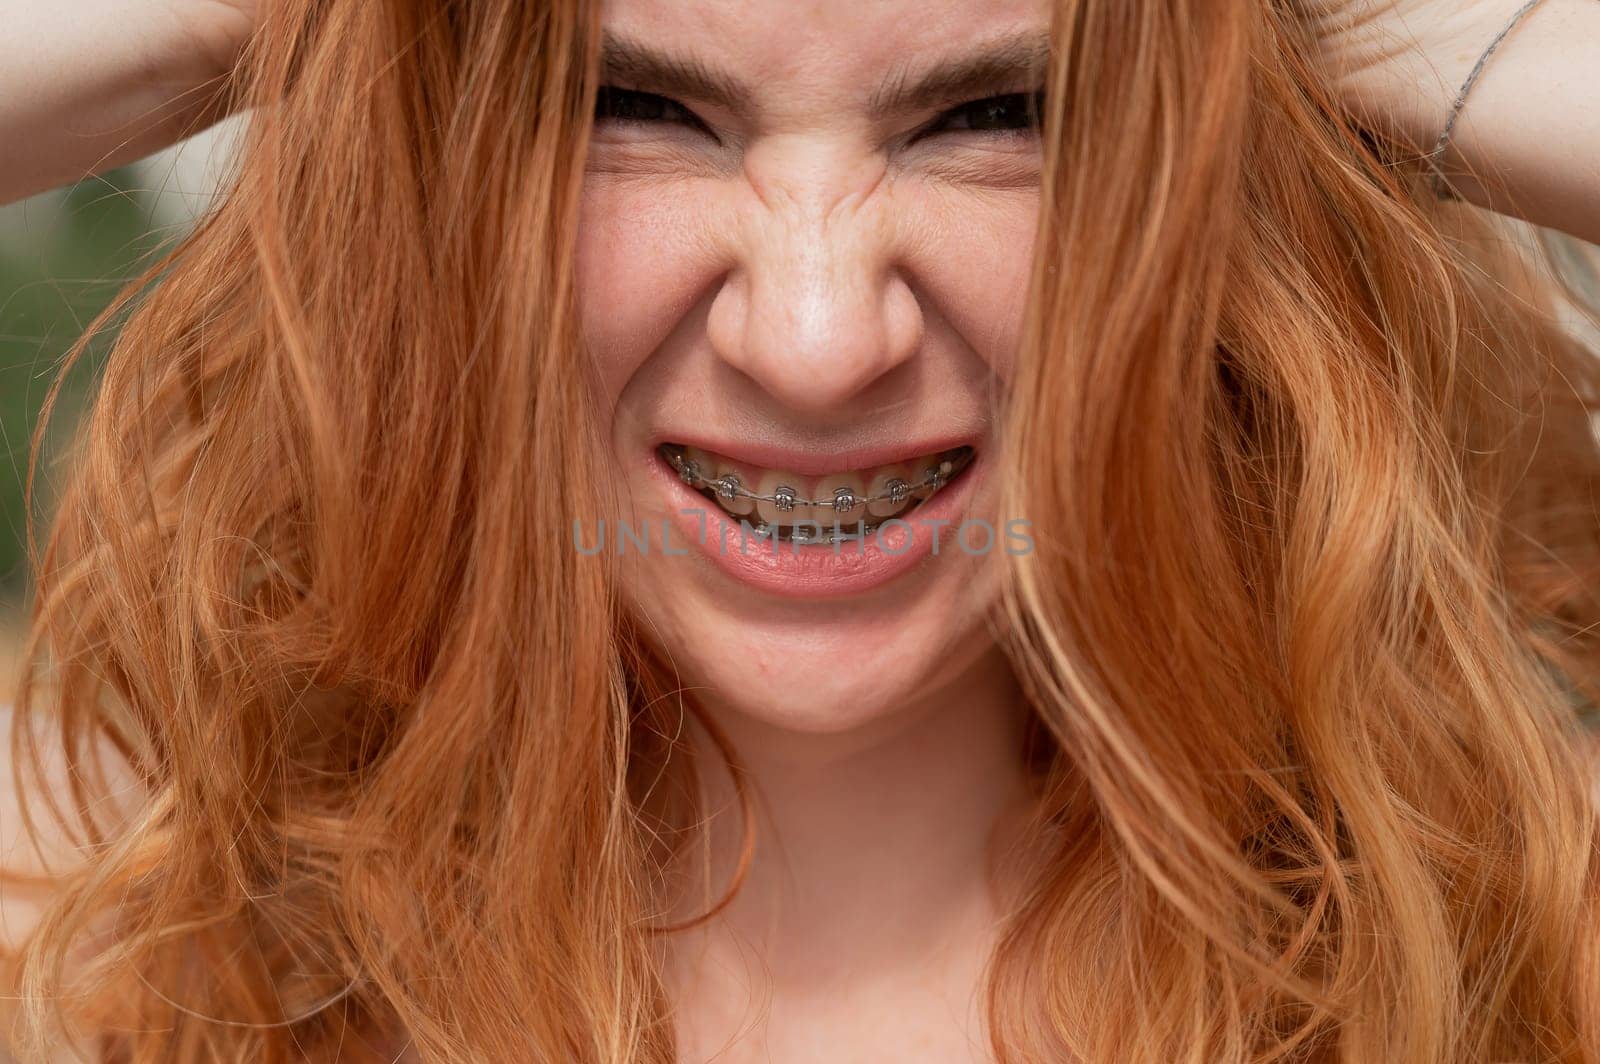 Close-up portrait of a young red-haired woman with braces on her teeth. Girl makes faces at the camera outdoors